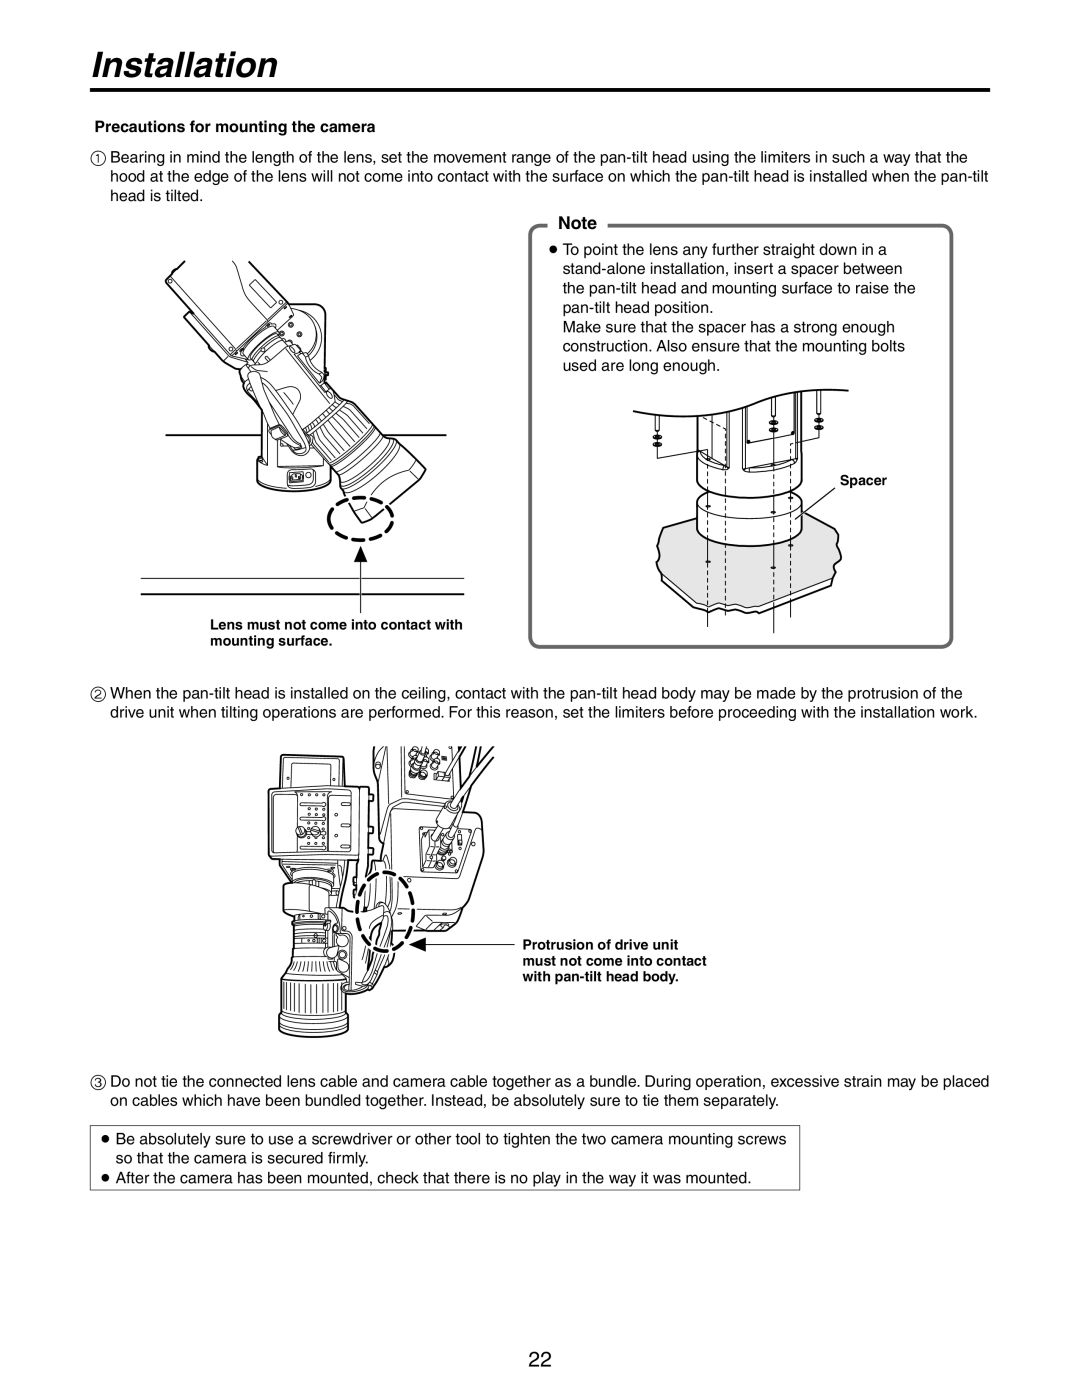 Panasonic AW-PH405N manual Installation, Precautions for mounting the camera, Spacer 